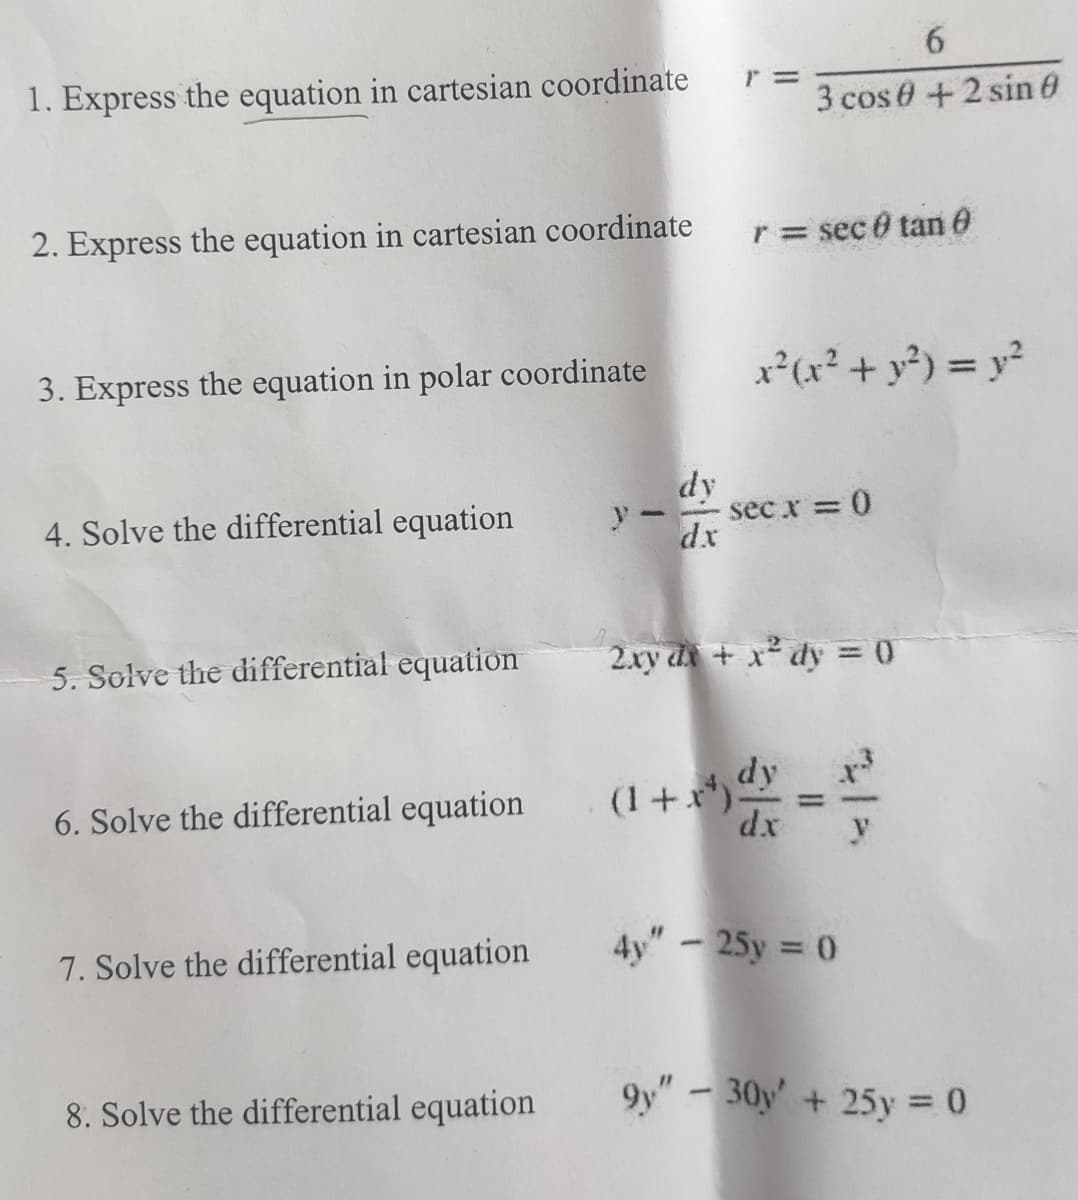 6
1. Express the equation in cartesian coordinate
r =
3 cos 0 + 2 sin 0
2. Express the equation in cartesian coordinate
r = sec @ tan 0
3. Express the equation in polar coordinate
x²(x² + y²) = y²
dy
4. Solve the differential equation
dx
- sec x = 0
5. Solve the differential equation
6. Solve the differential equation
2xy dx + x2 dy = 0
(1+r) dy
7. Solve the differential equation
dx
y
4y" - 25y = 0
8. Solve the differential equation
9y"-30y+25y = 0